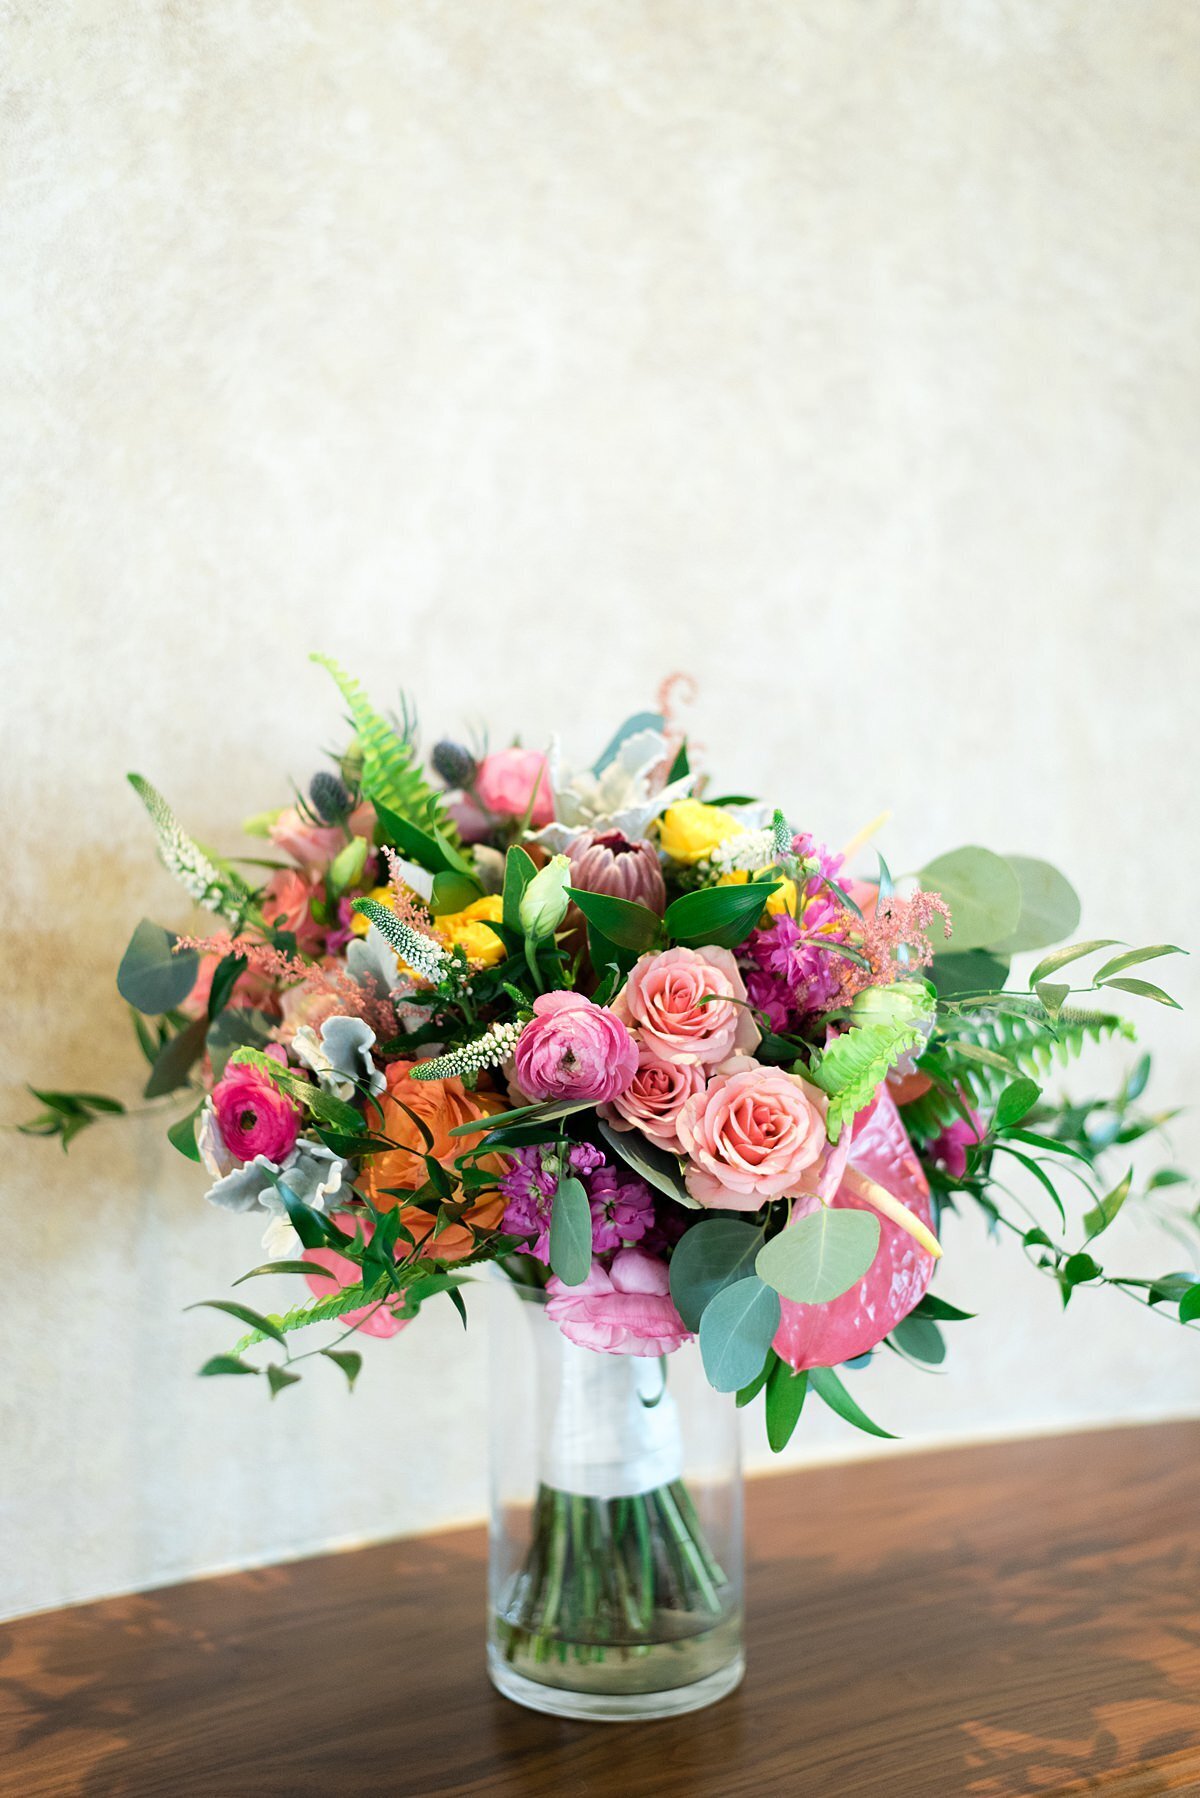 A lush and colorful bridal bouquet wrapped with  white satin ribbon and is placed in a clear glass vase. There are  pink roses, pink ranunculus, orange roses, hot pink ranunculus, yellow roses, pink peonies, dusty miller, protea, king protea, and smilax vine in this very colorful bouquet.